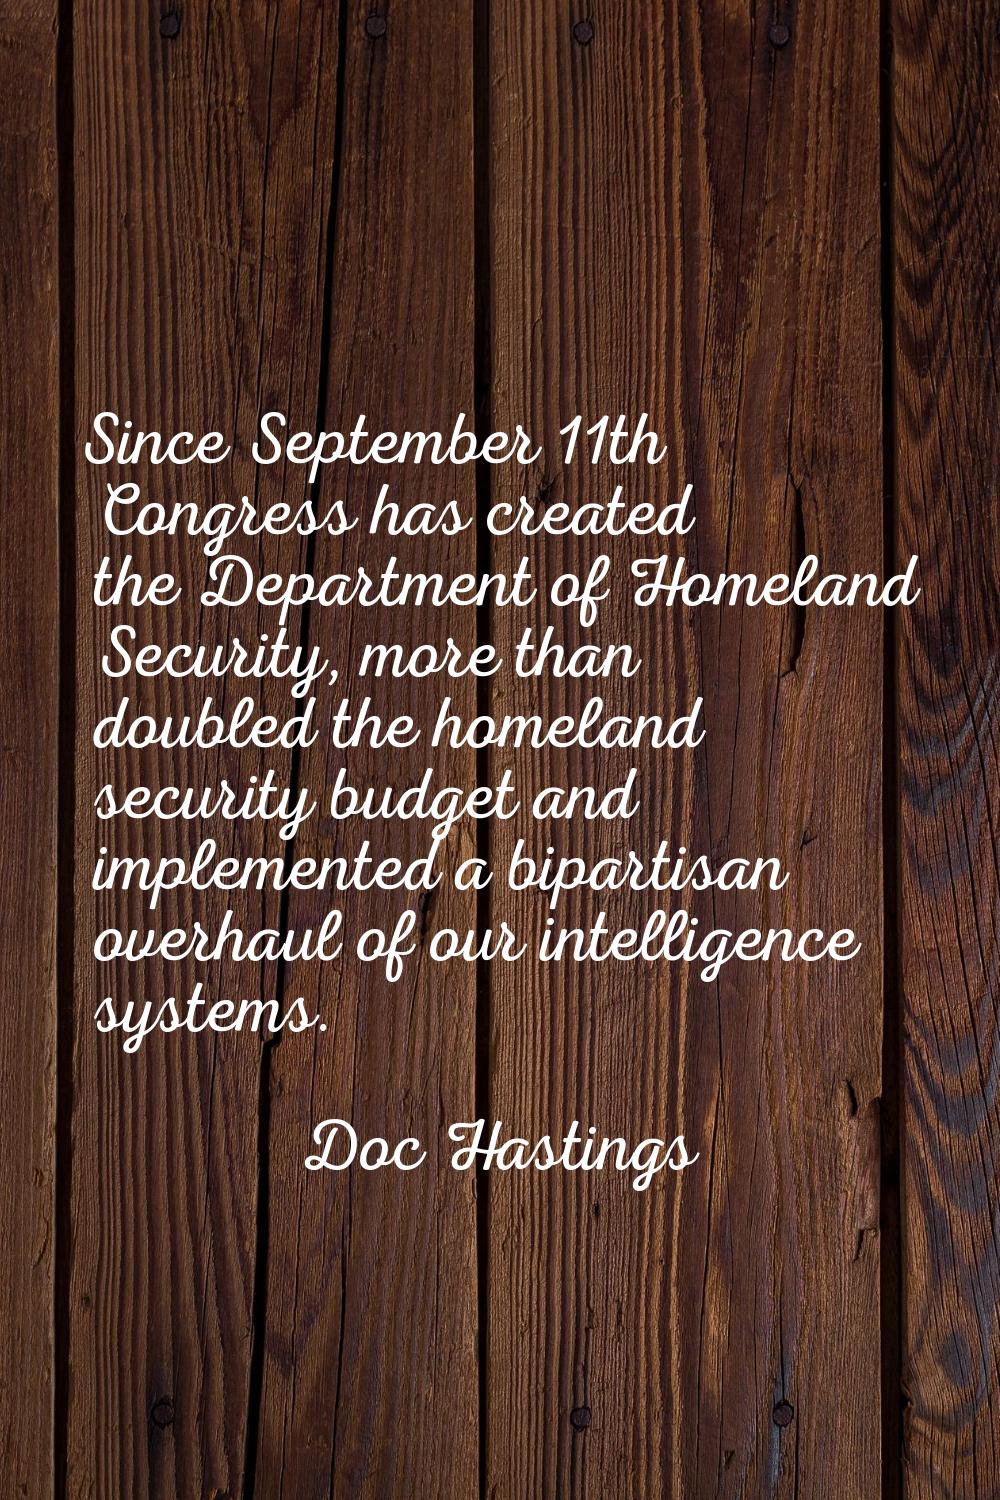 Since September 11th Congress has created the Department of Homeland Security, more than doubled th